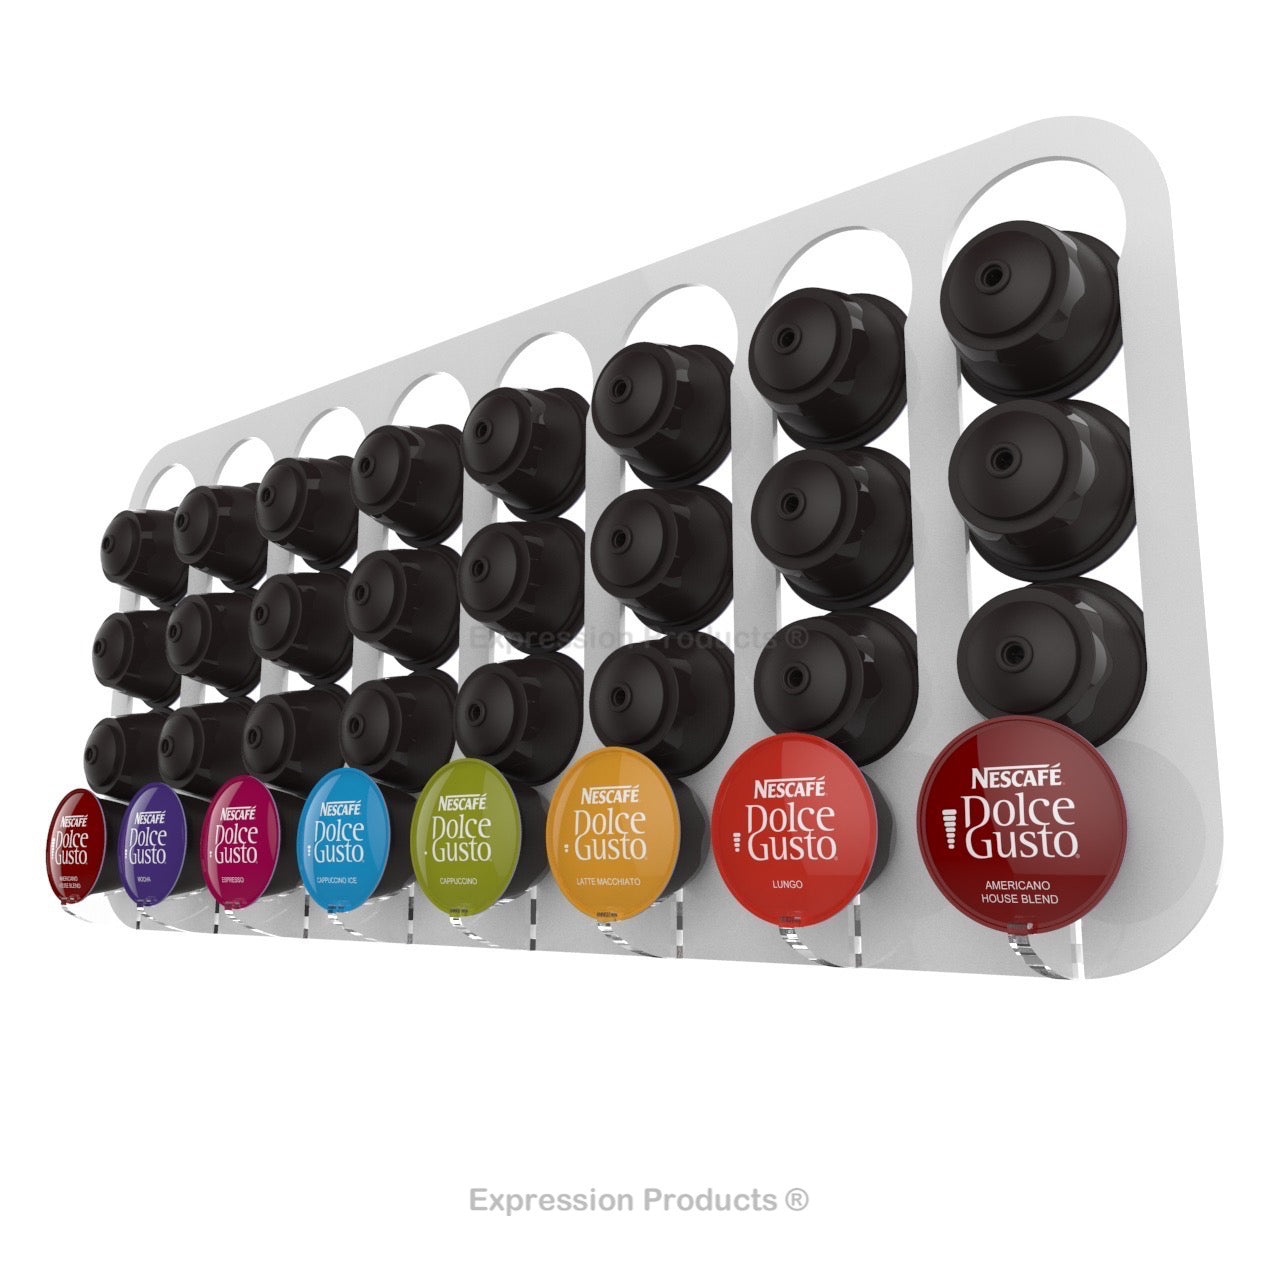 Dolce gusto coffee pod holder, wall mounted, half height.  Shown in white holding 32 pods